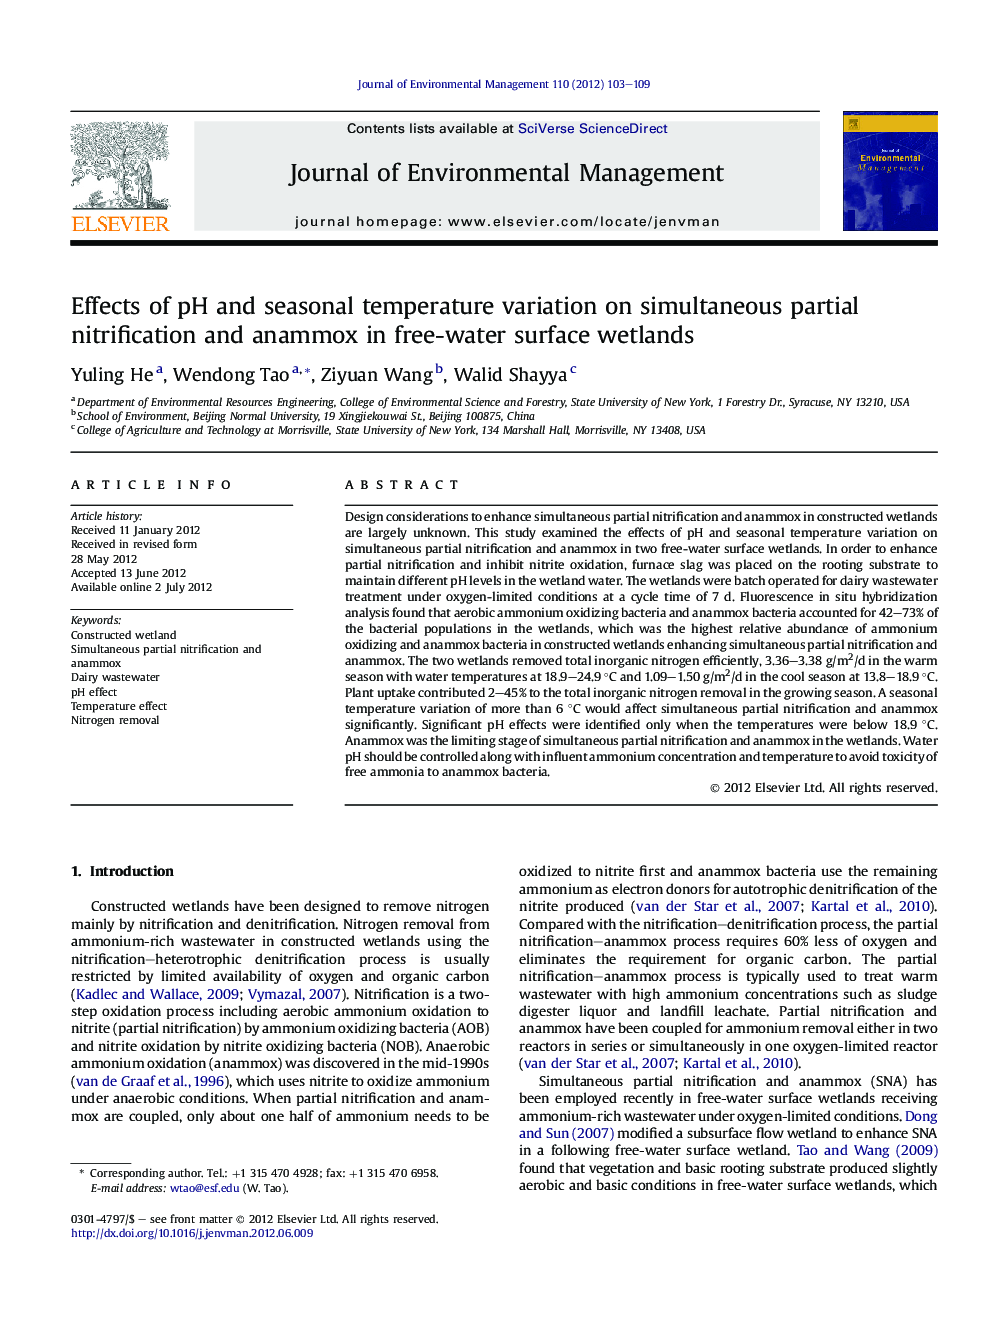 Effects of pH and seasonal temperature variation on simultaneous partial nitrification and anammox in free-water surface wetlands